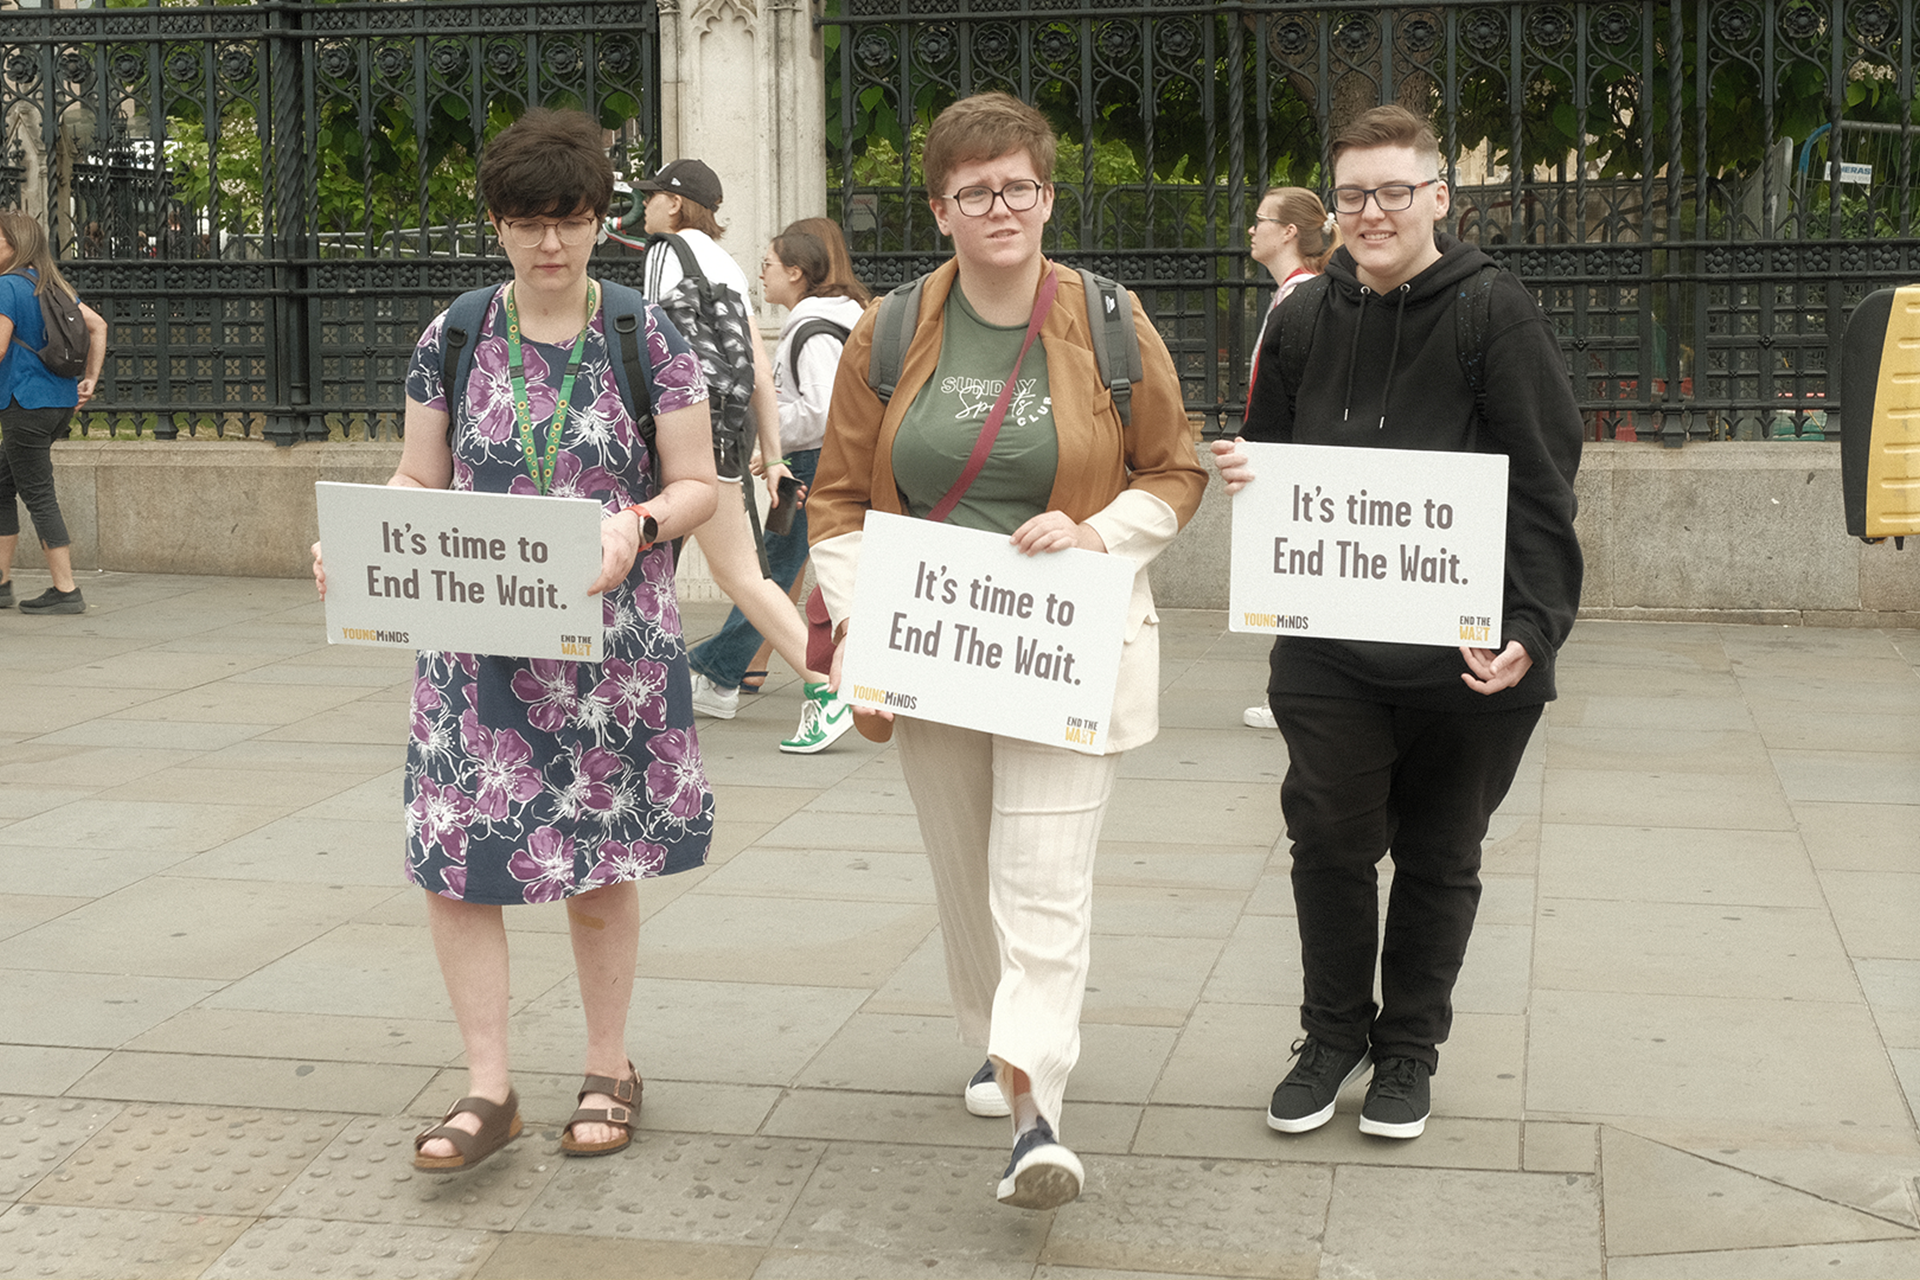 Three Activists holding signs in Parliament Square that read: "It's time to End The Wait."